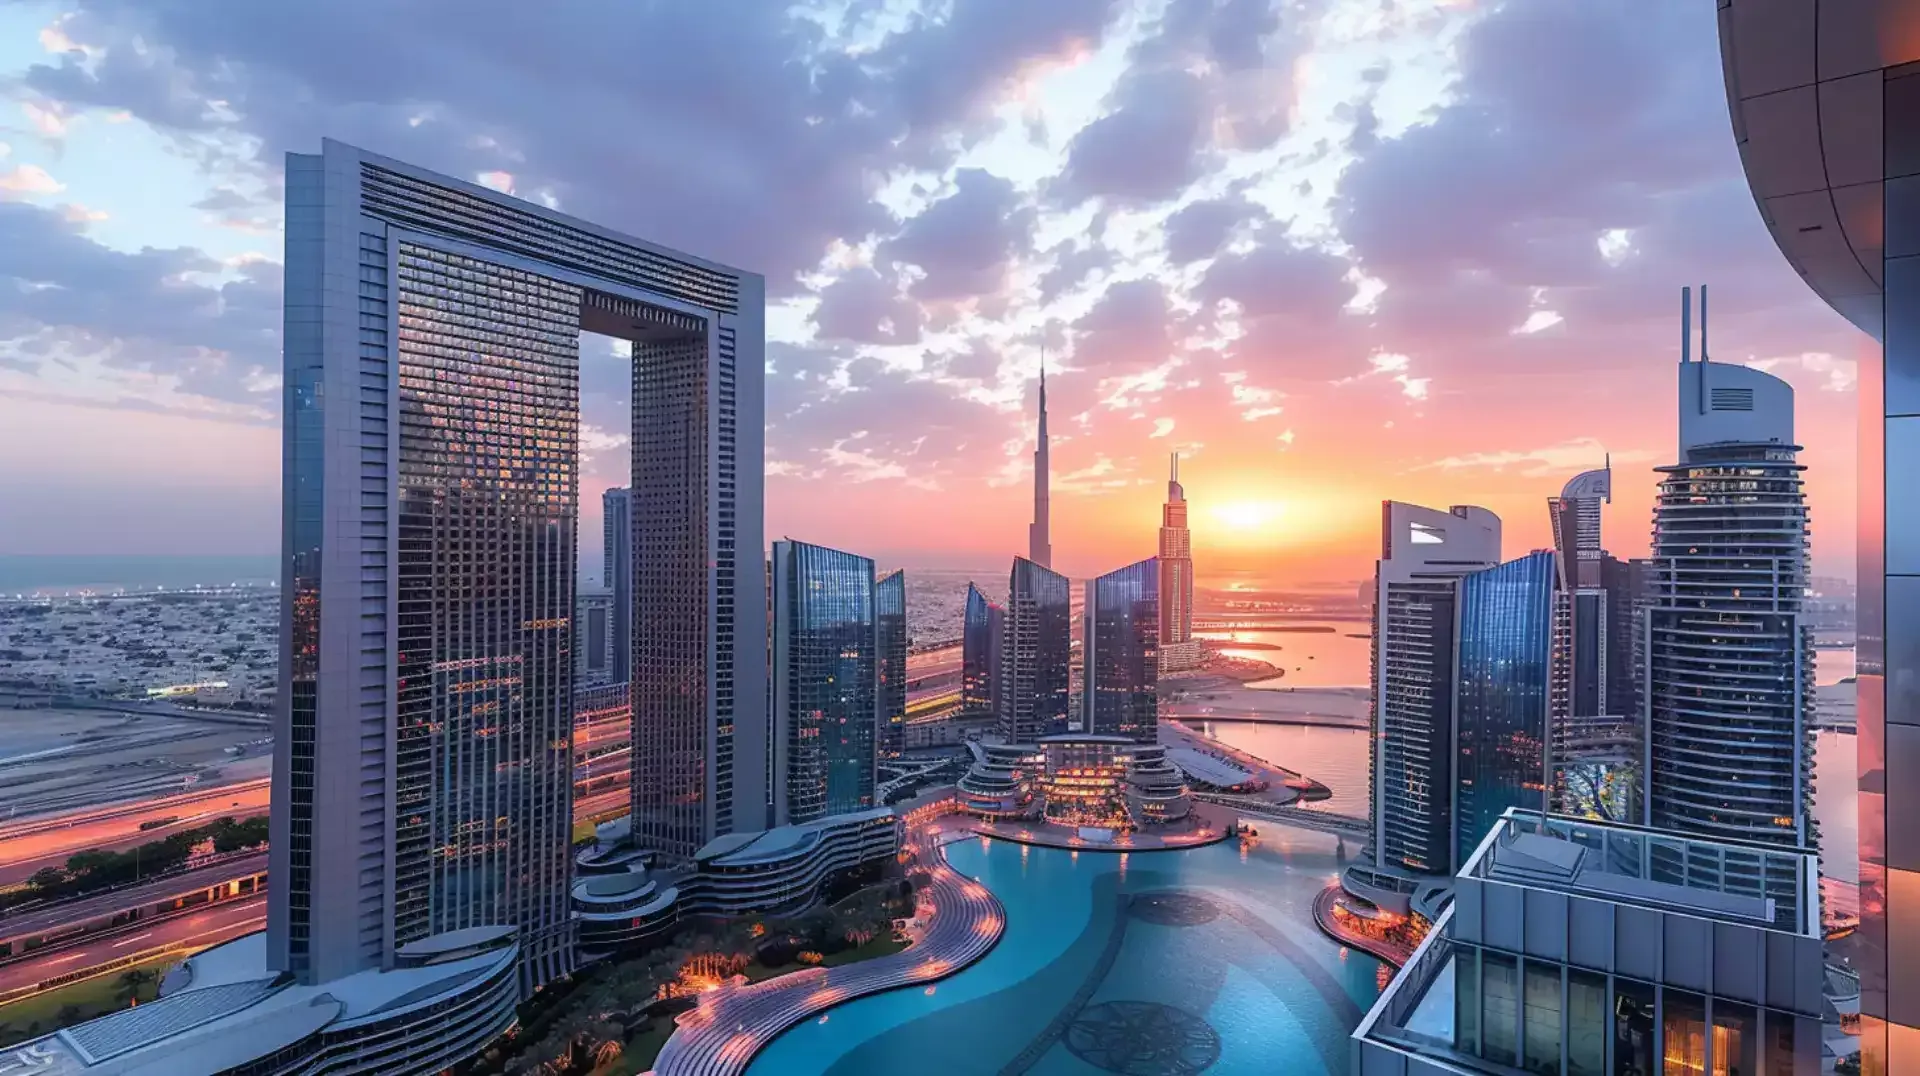 Visual representation of the mandatory legal requirements for businesses operating in Dubai